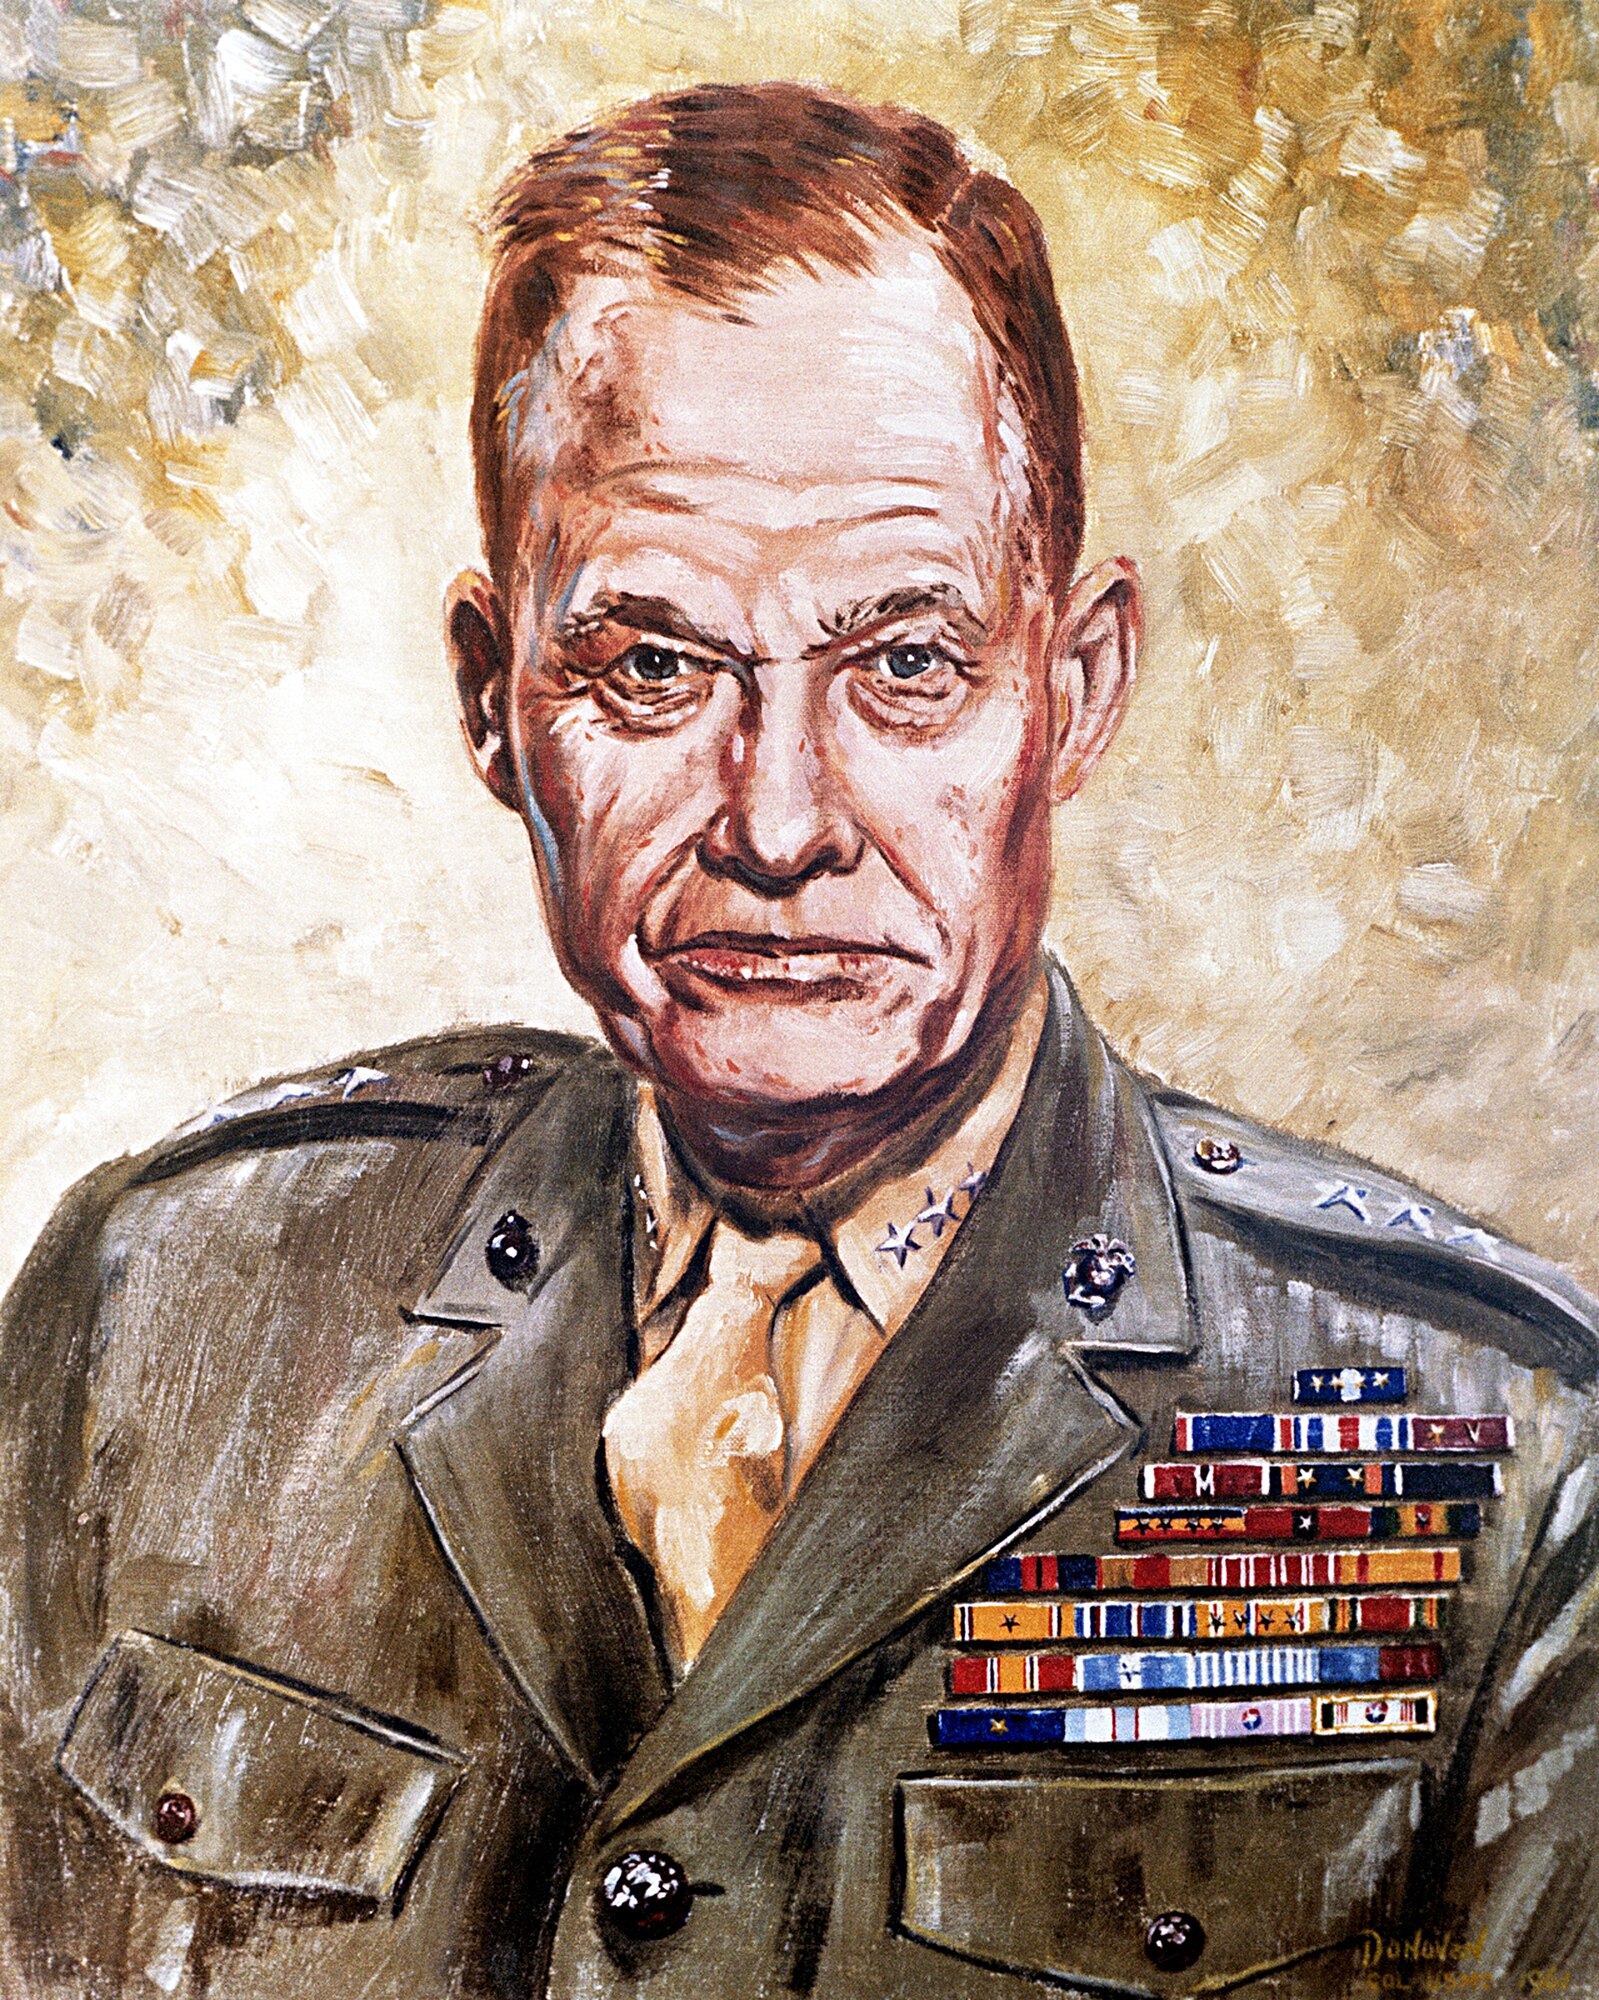 Retired Lt. Gen. Lewis Puller is accounted as the most decorated Marine in history. (Courtesy photo)